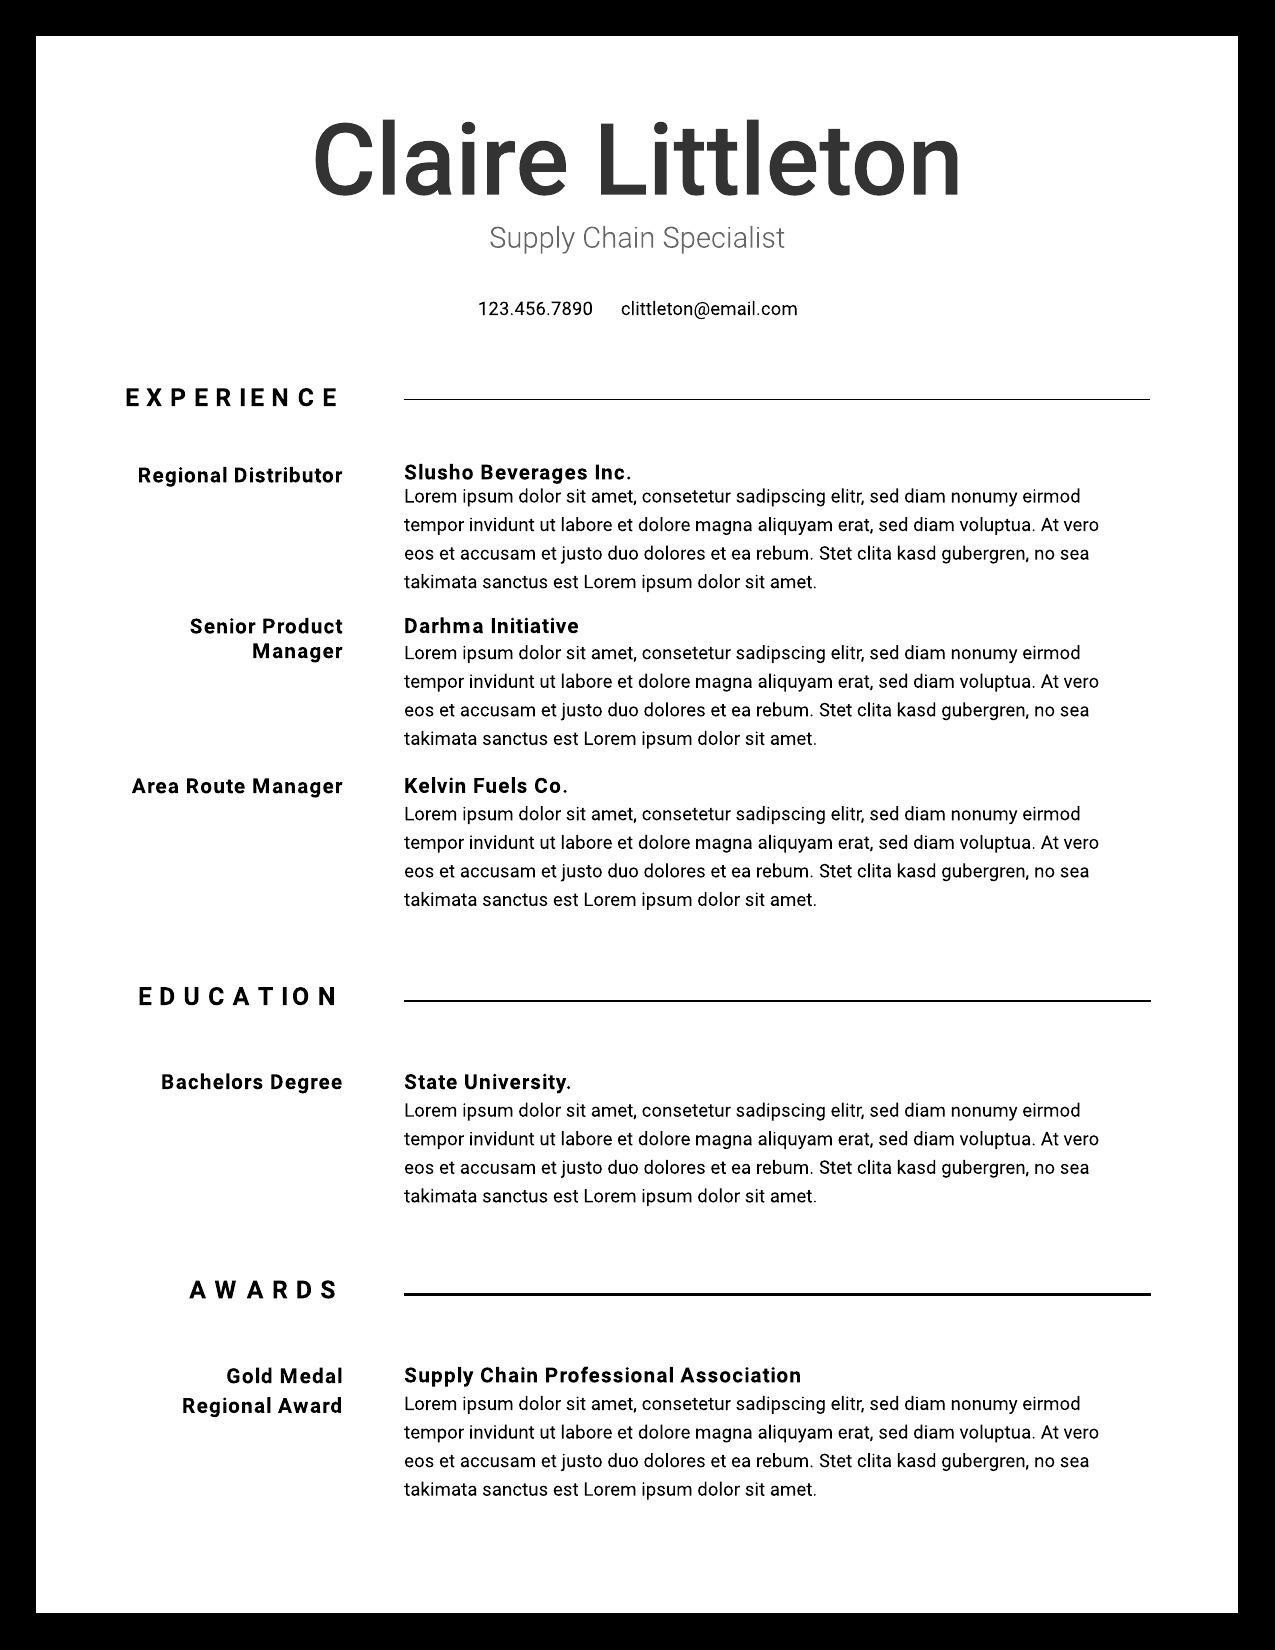 Free Resume Writing Tips and Samples Resume Examples & Writing Tips for 2021